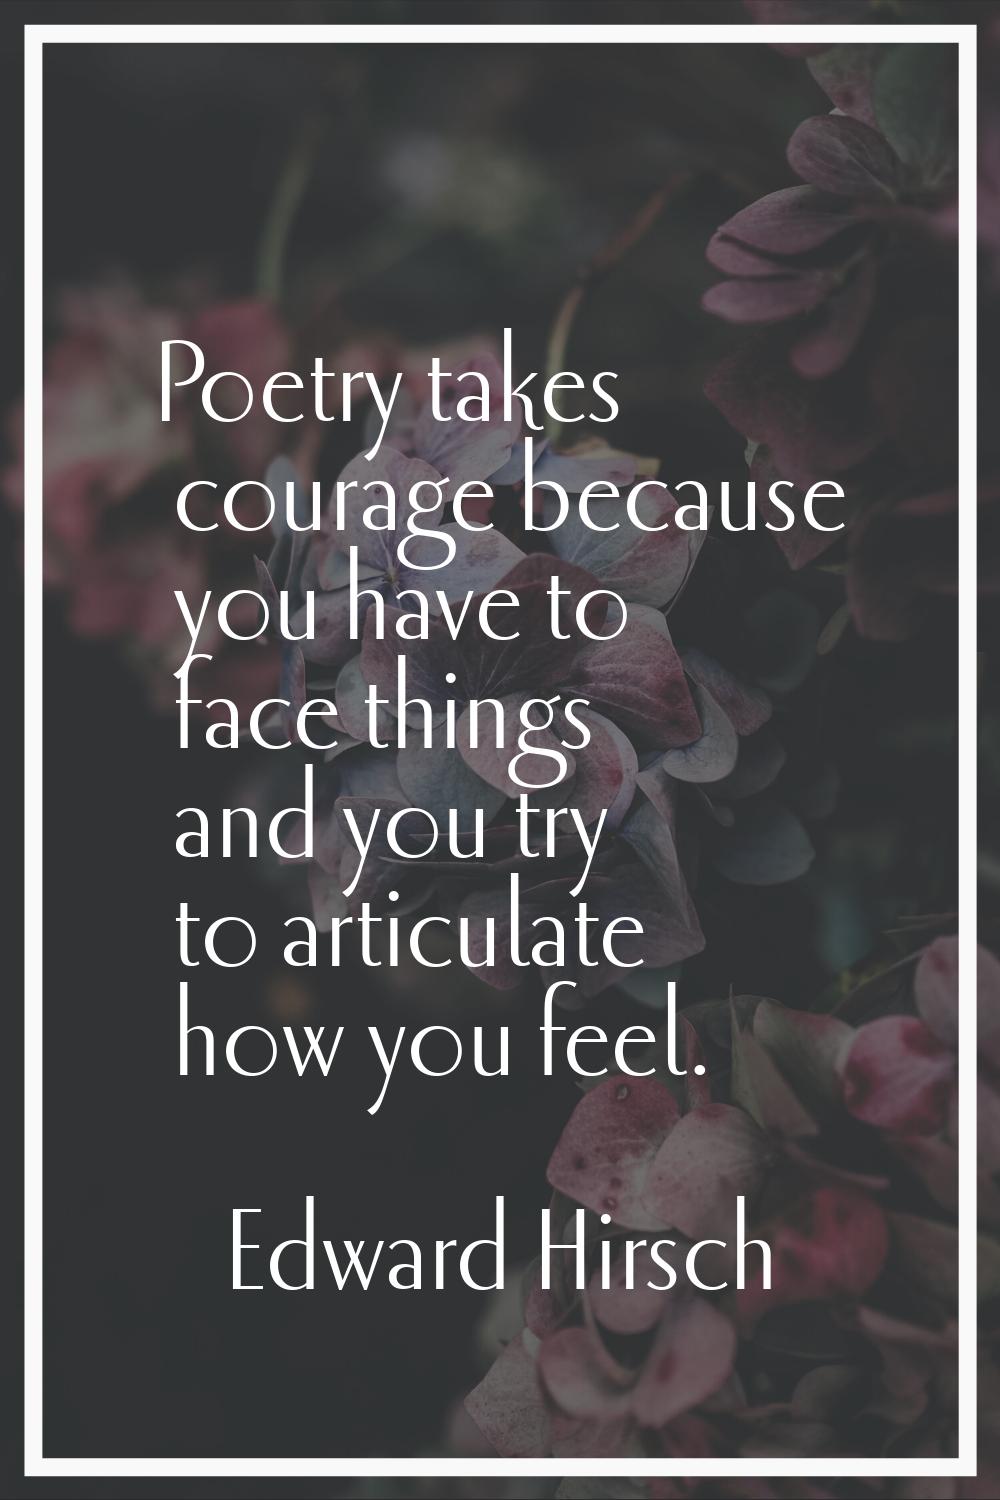 Poetry takes courage because you have to face things and you try to articulate how you feel.